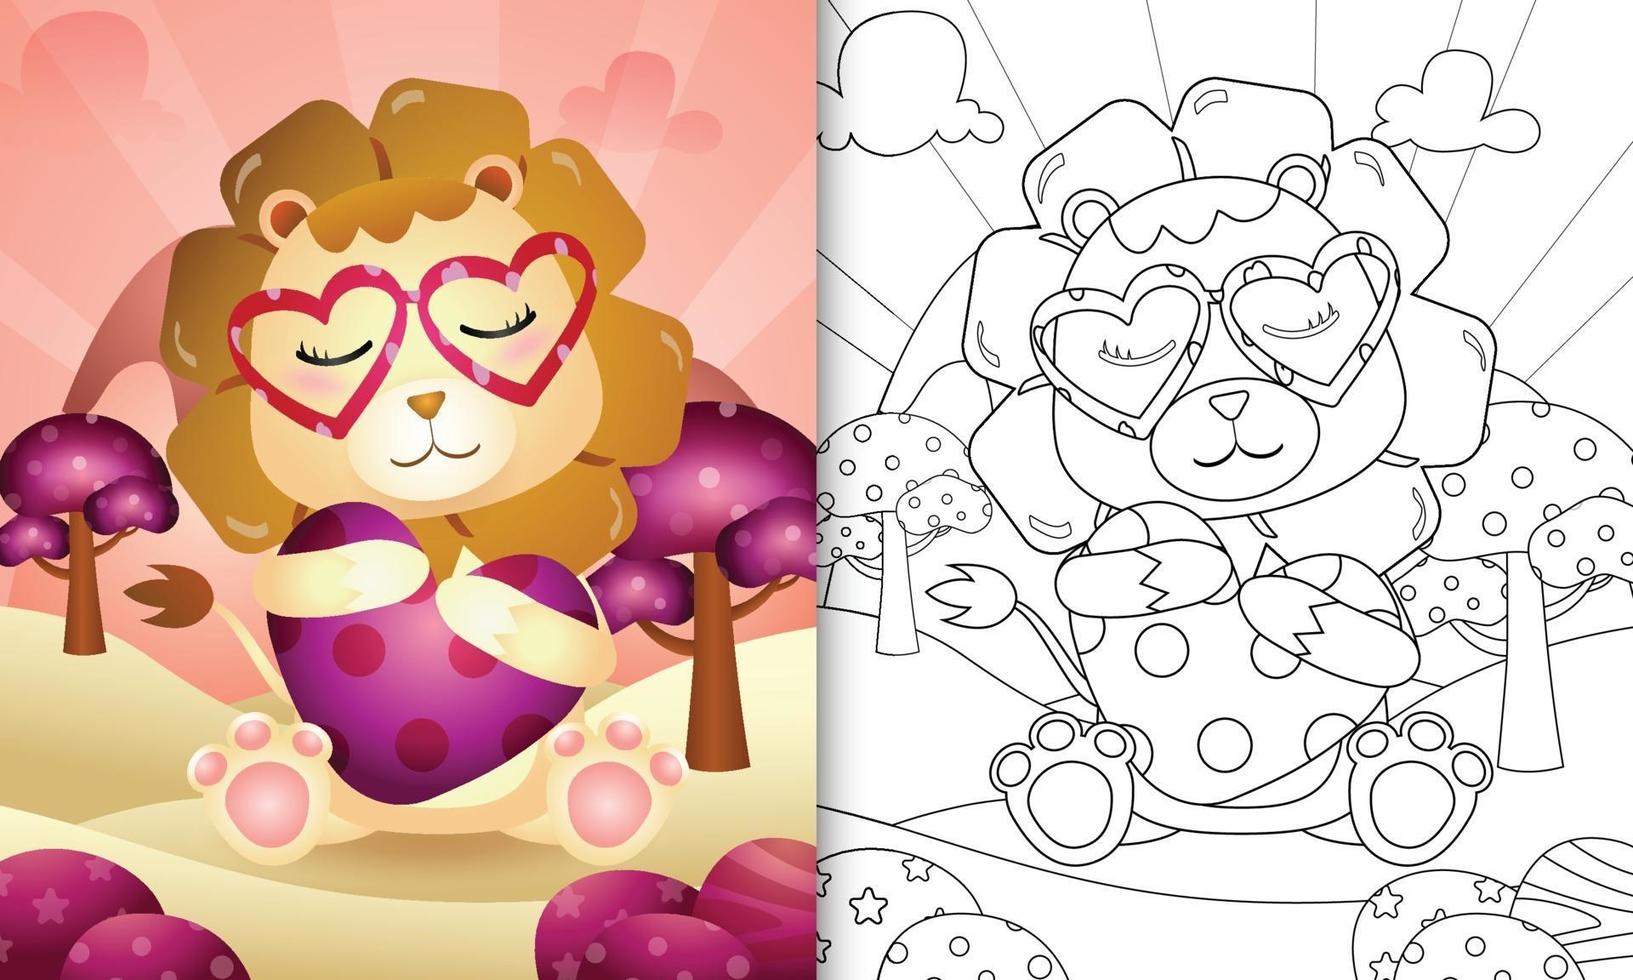 coloring book for kids with a cute lion hugging heart for valentine's day vector